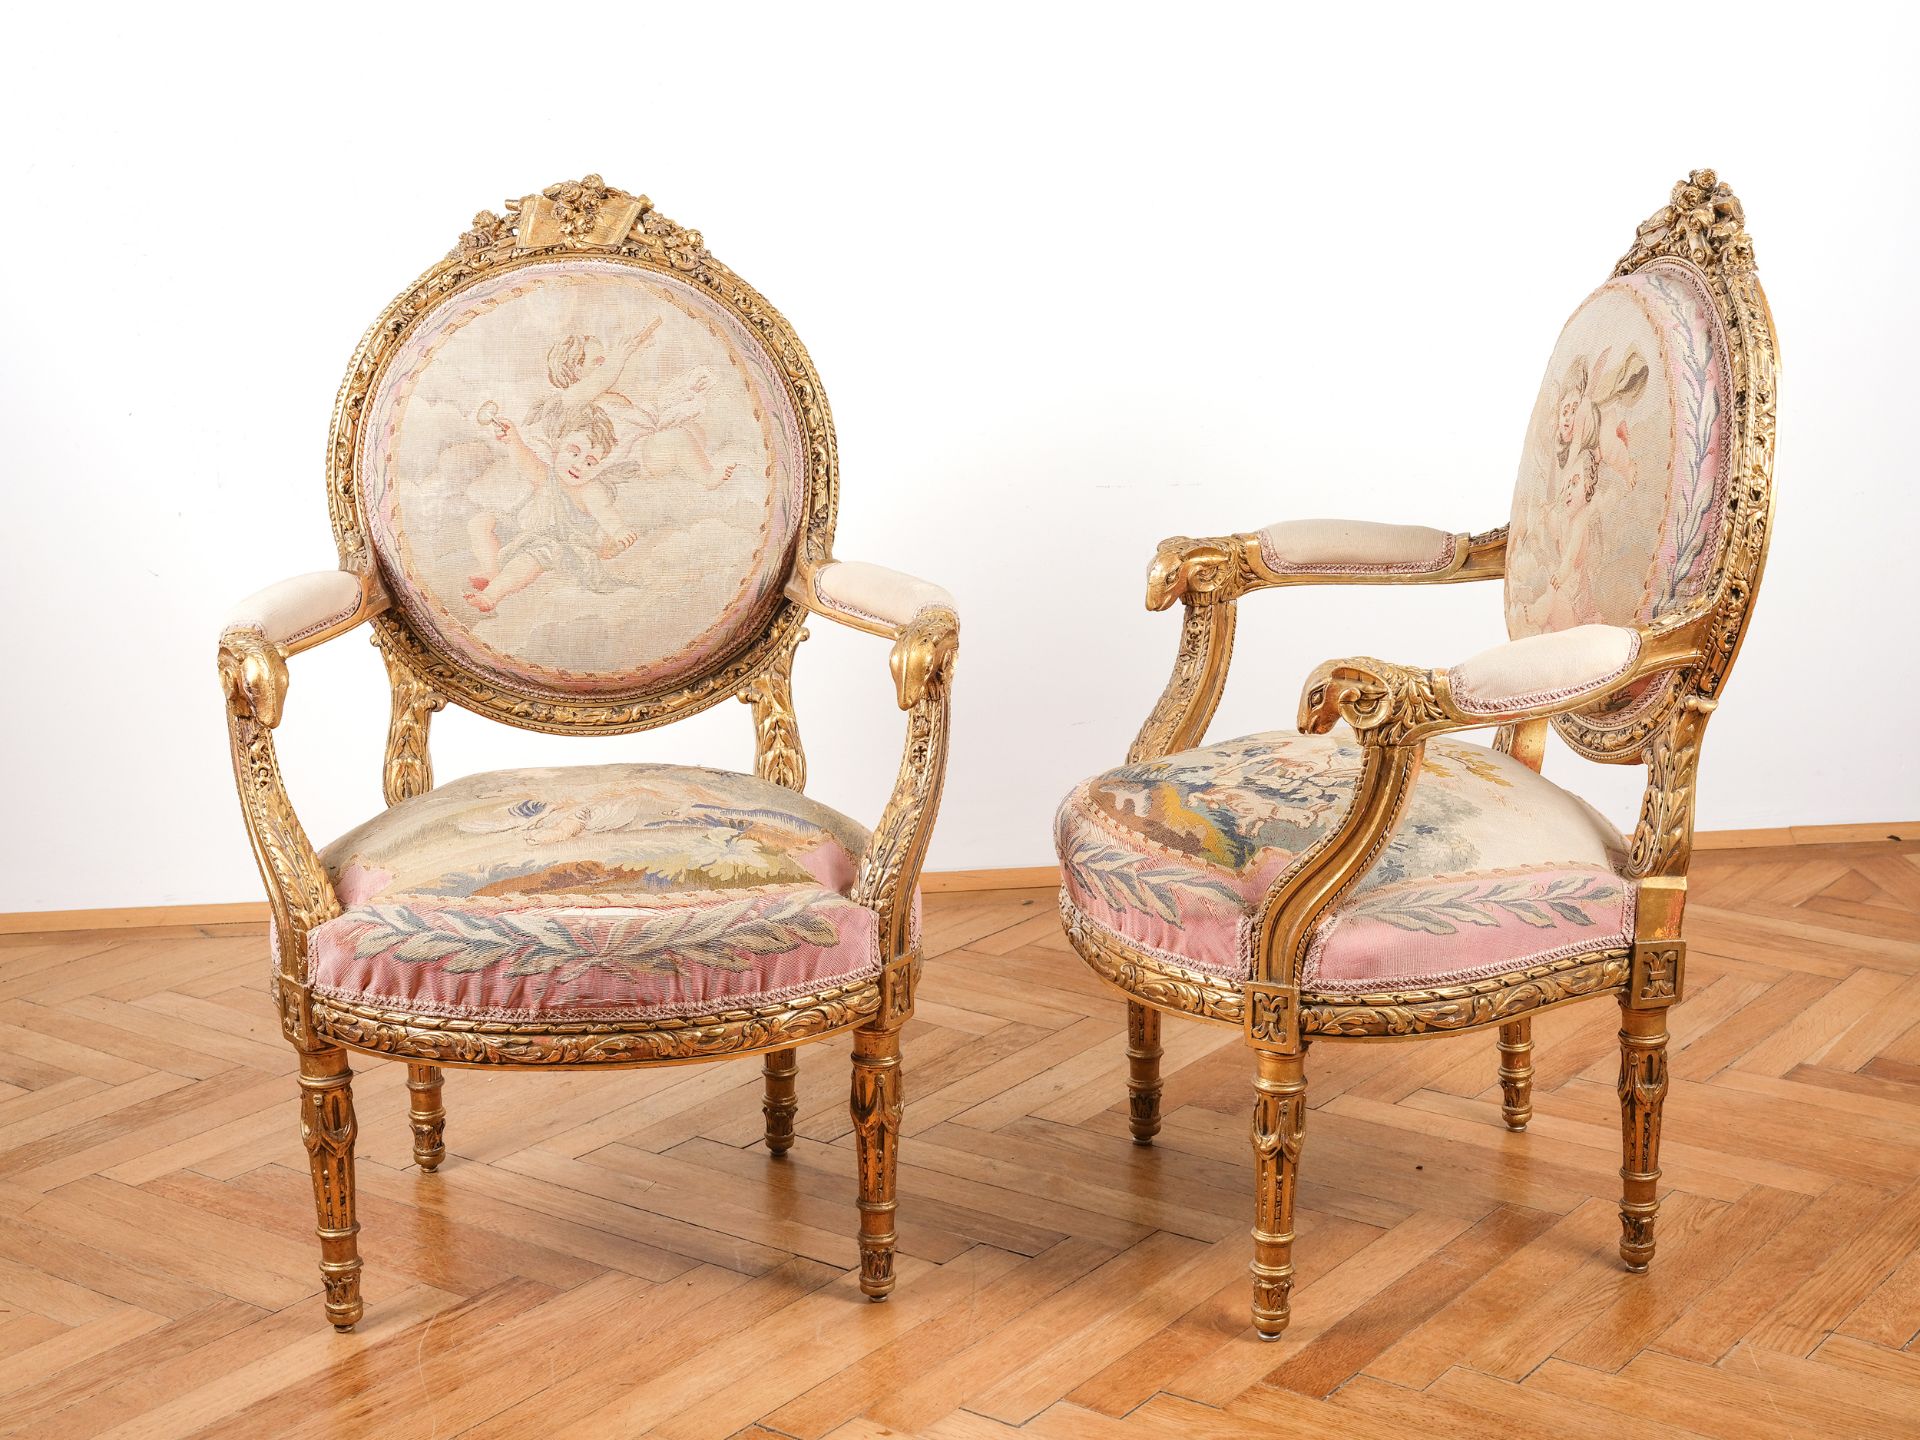 Five-piece seating set: 1 bench & 4 armchairs, Louis XVI style around 1900 - Image 3 of 8